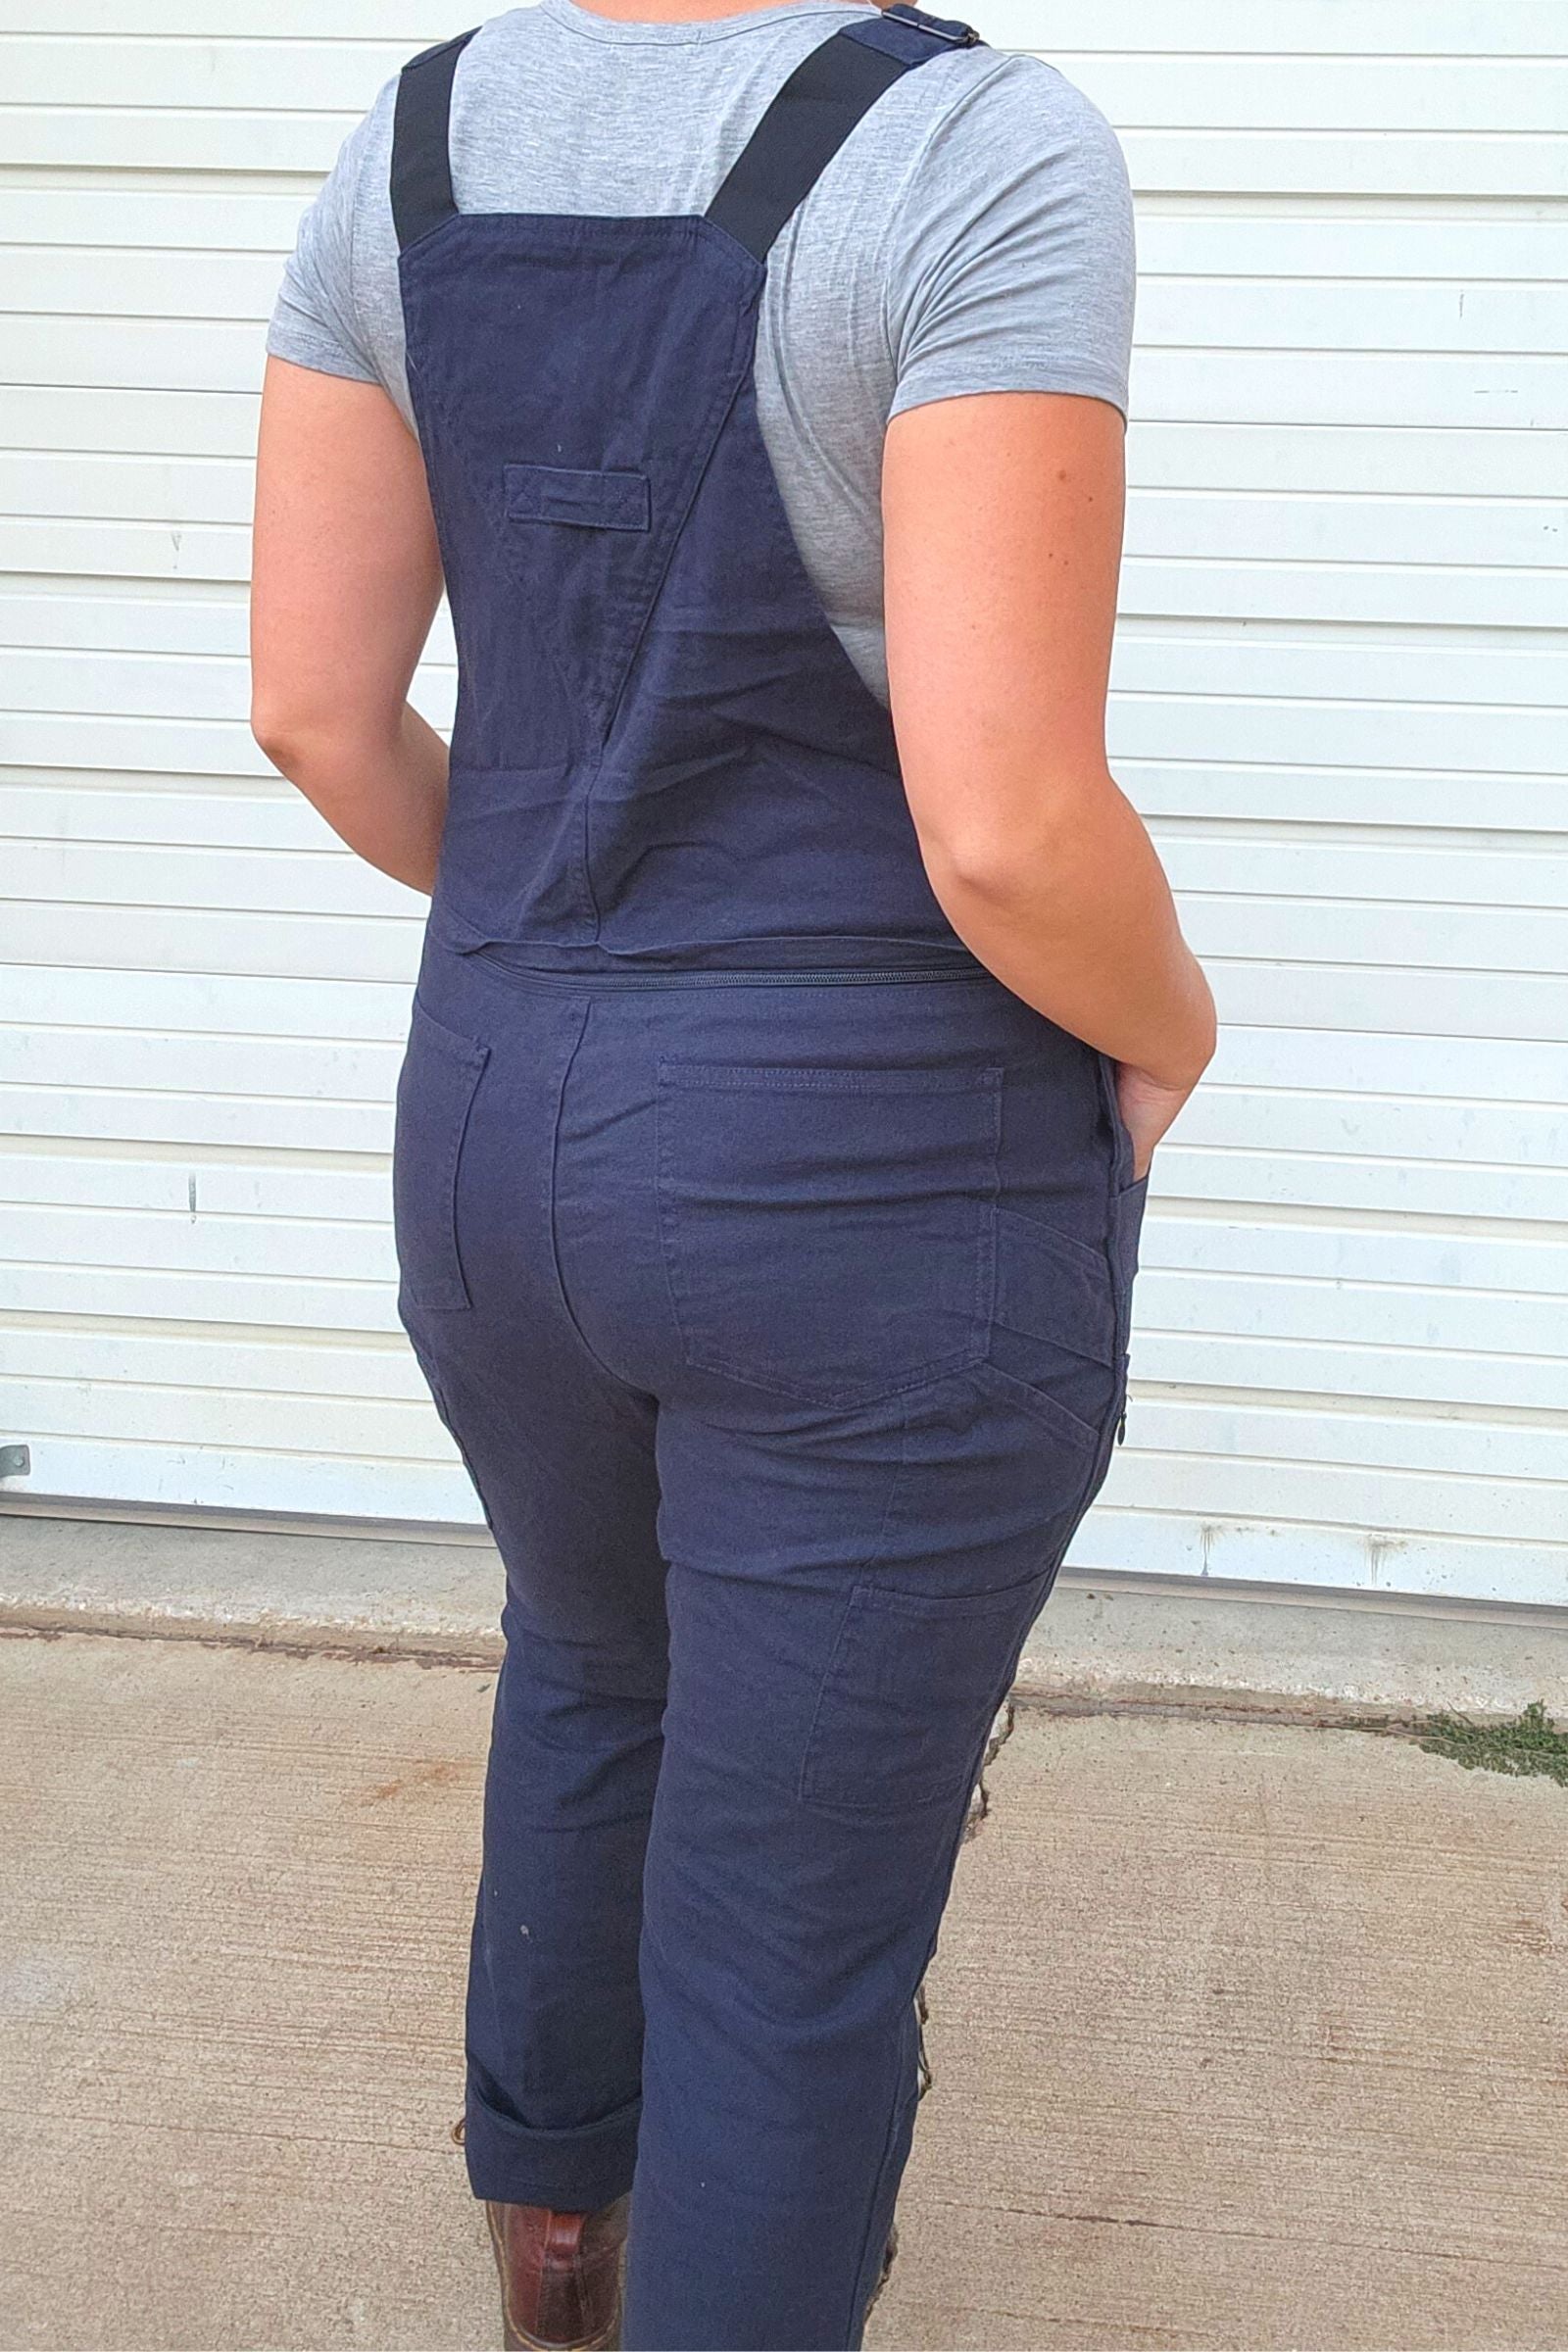 Dovetail Freshley Dropseat Overalls Navy